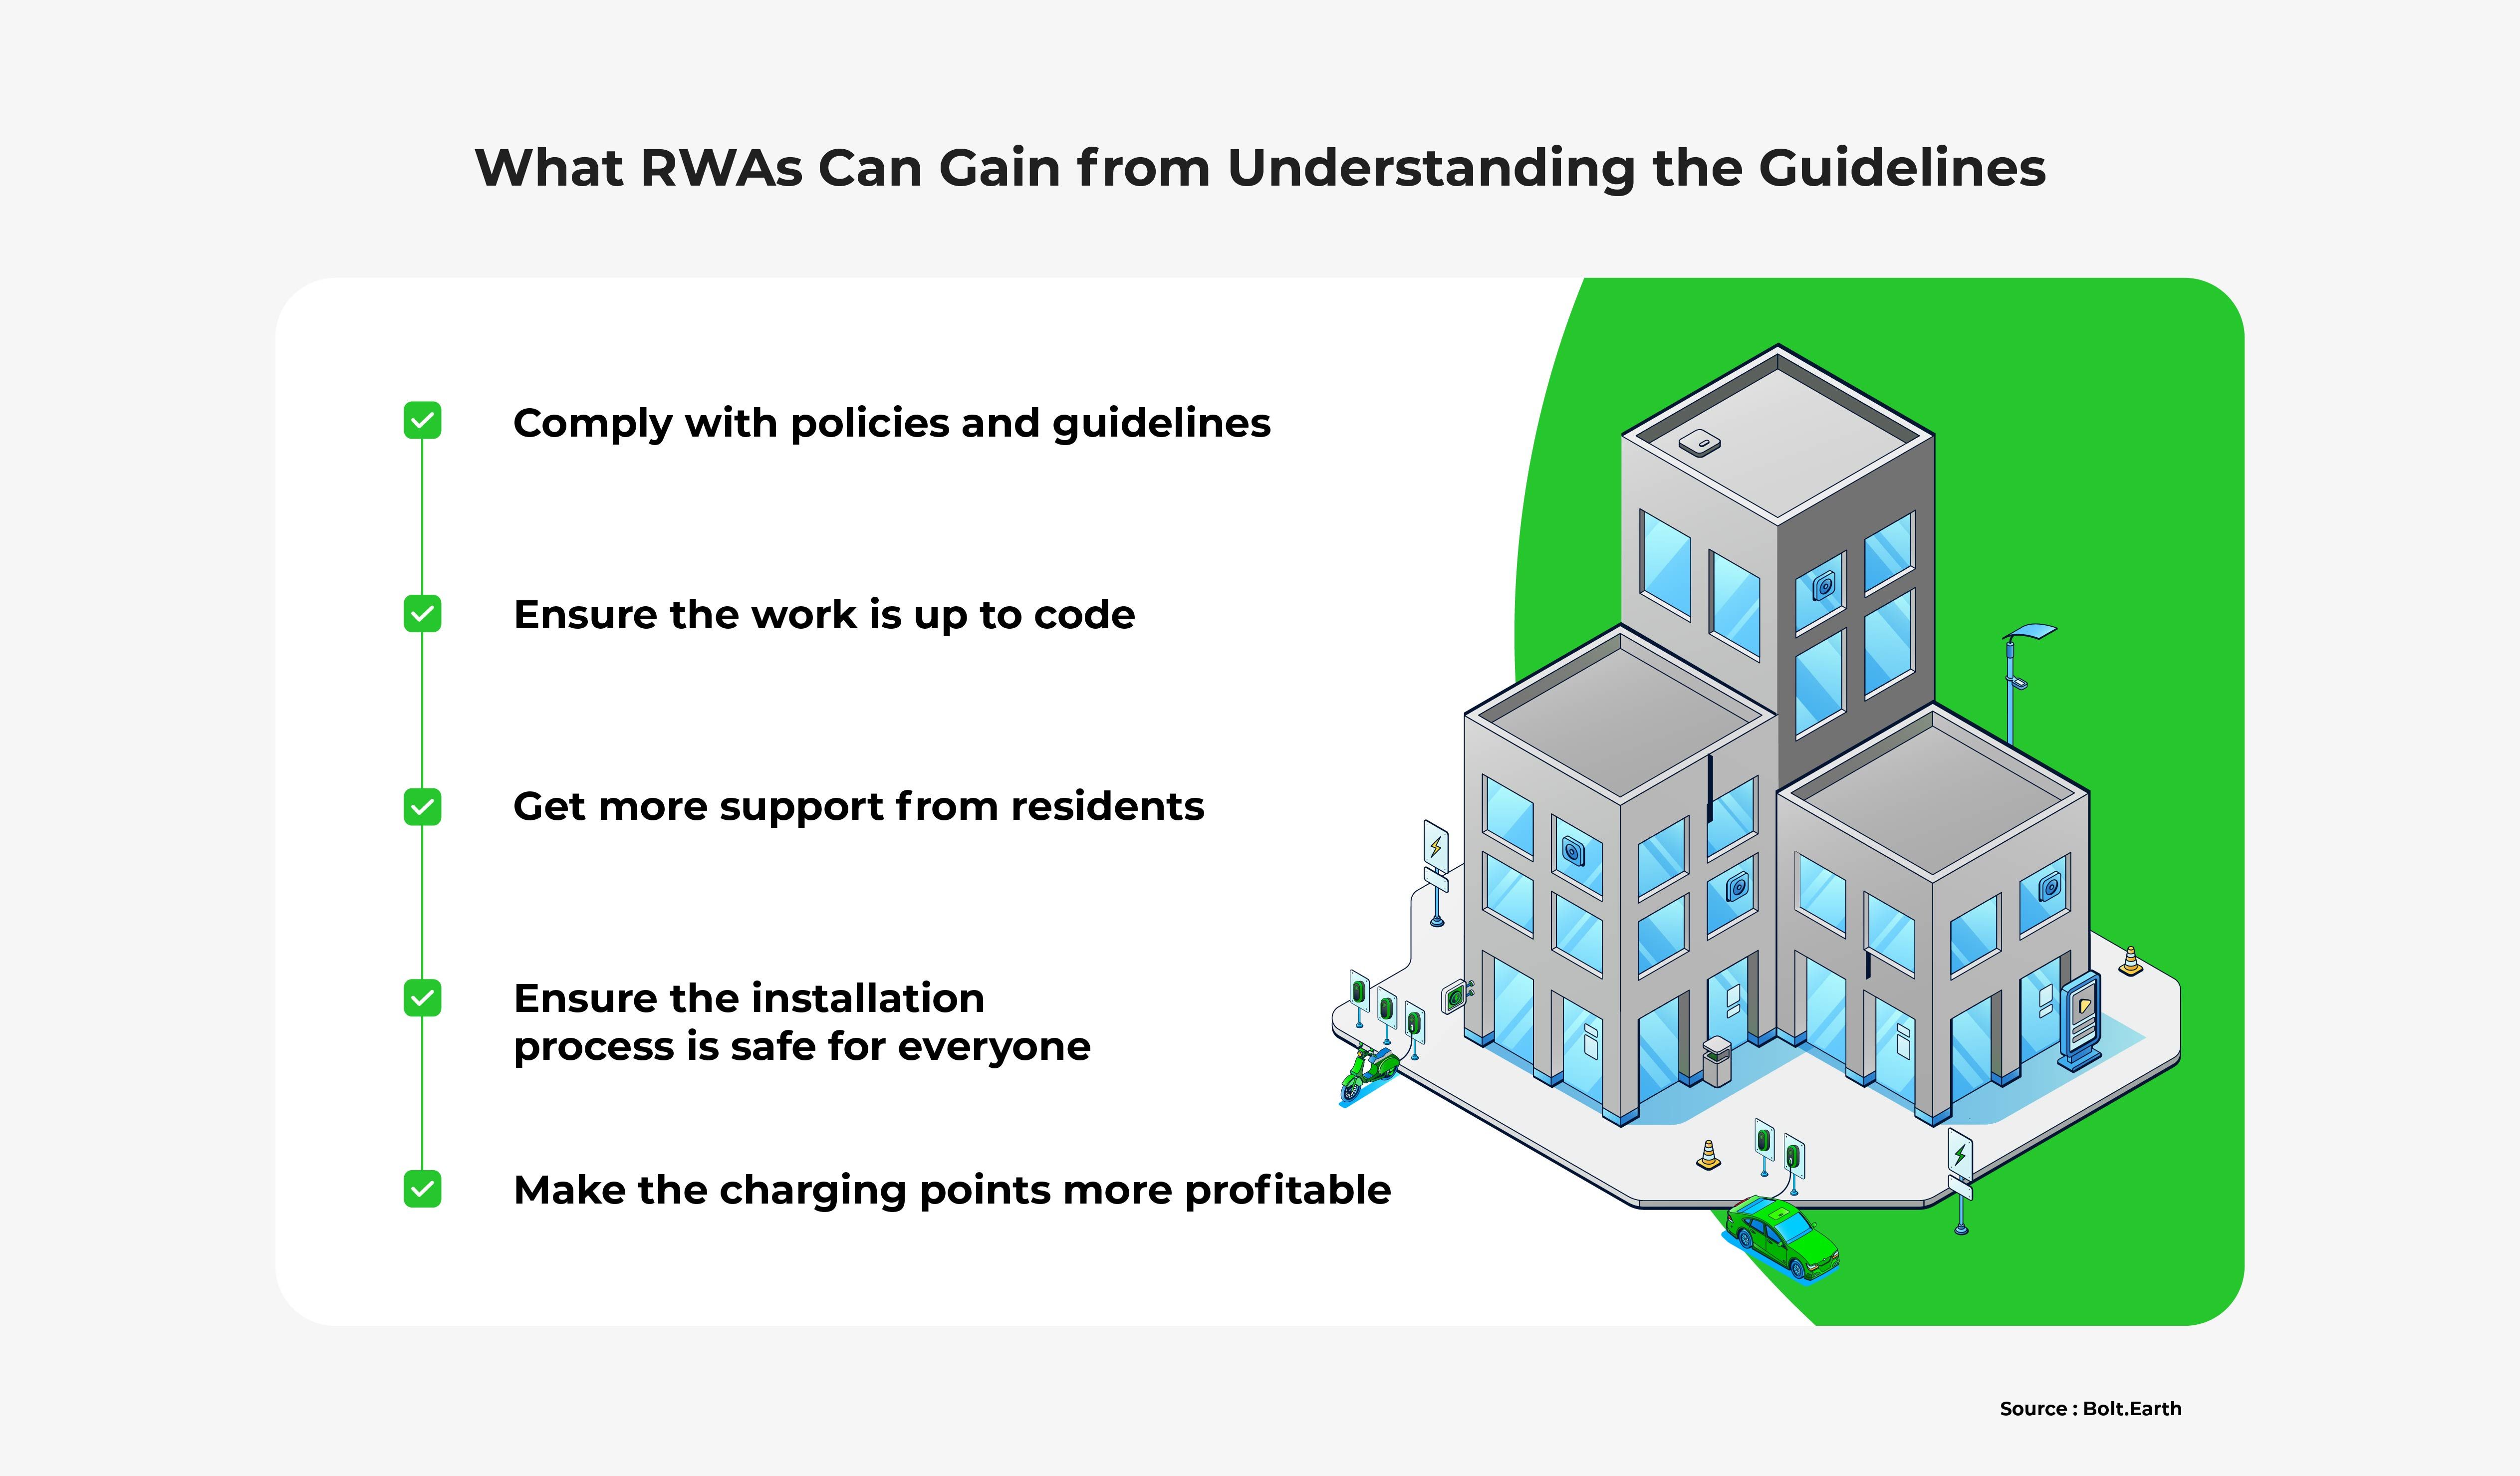 Drawing of the benefits RWAs gain from understanding government guidelines: Comply with policies and guidelines, ensure the work is up to code, get more support from residents, ensure the installation process is safe for everyone, and make the charging points more profitable.